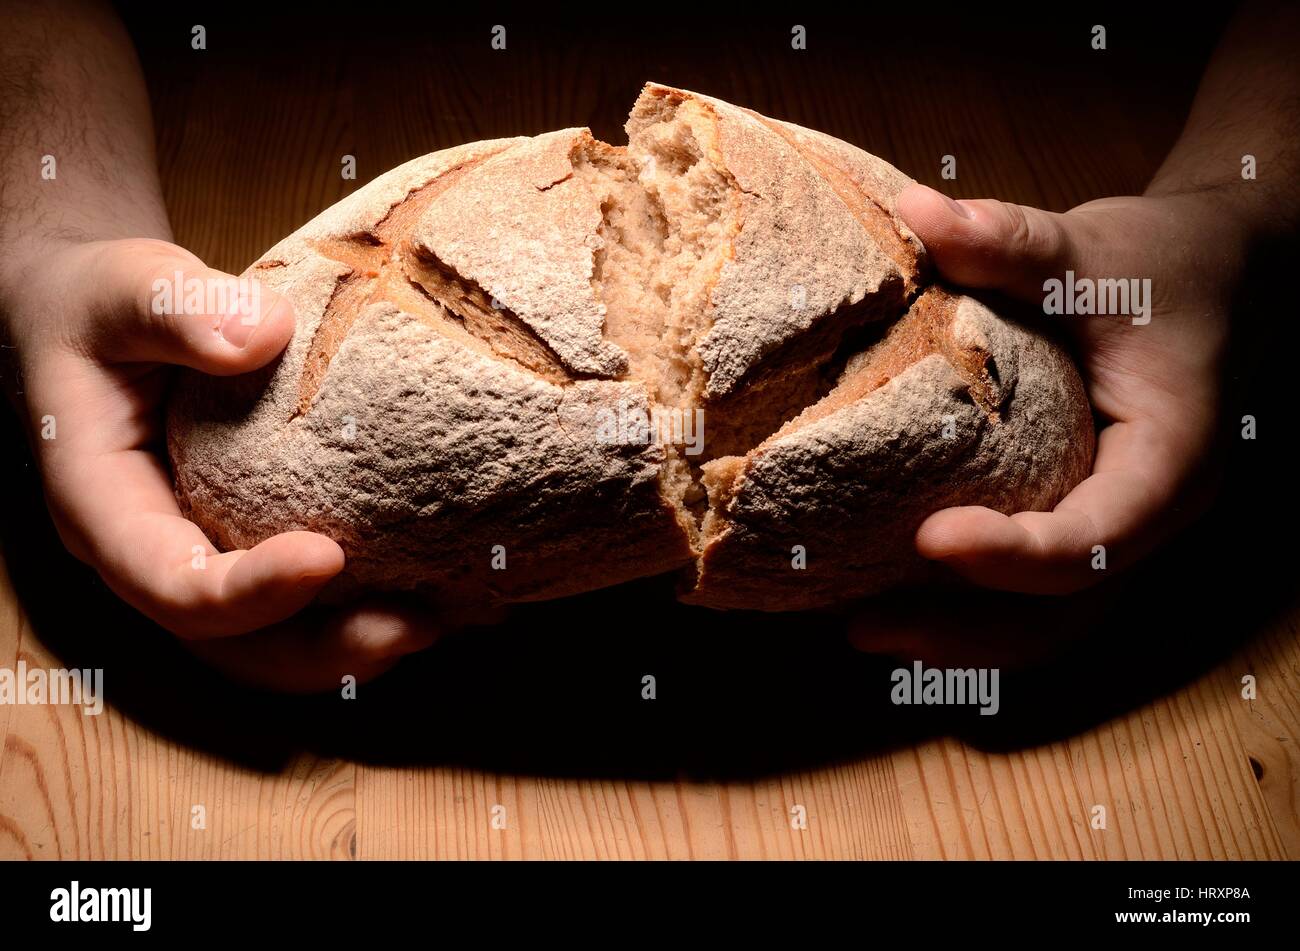 Breaking bread on a wooden table dark background Stock Photo